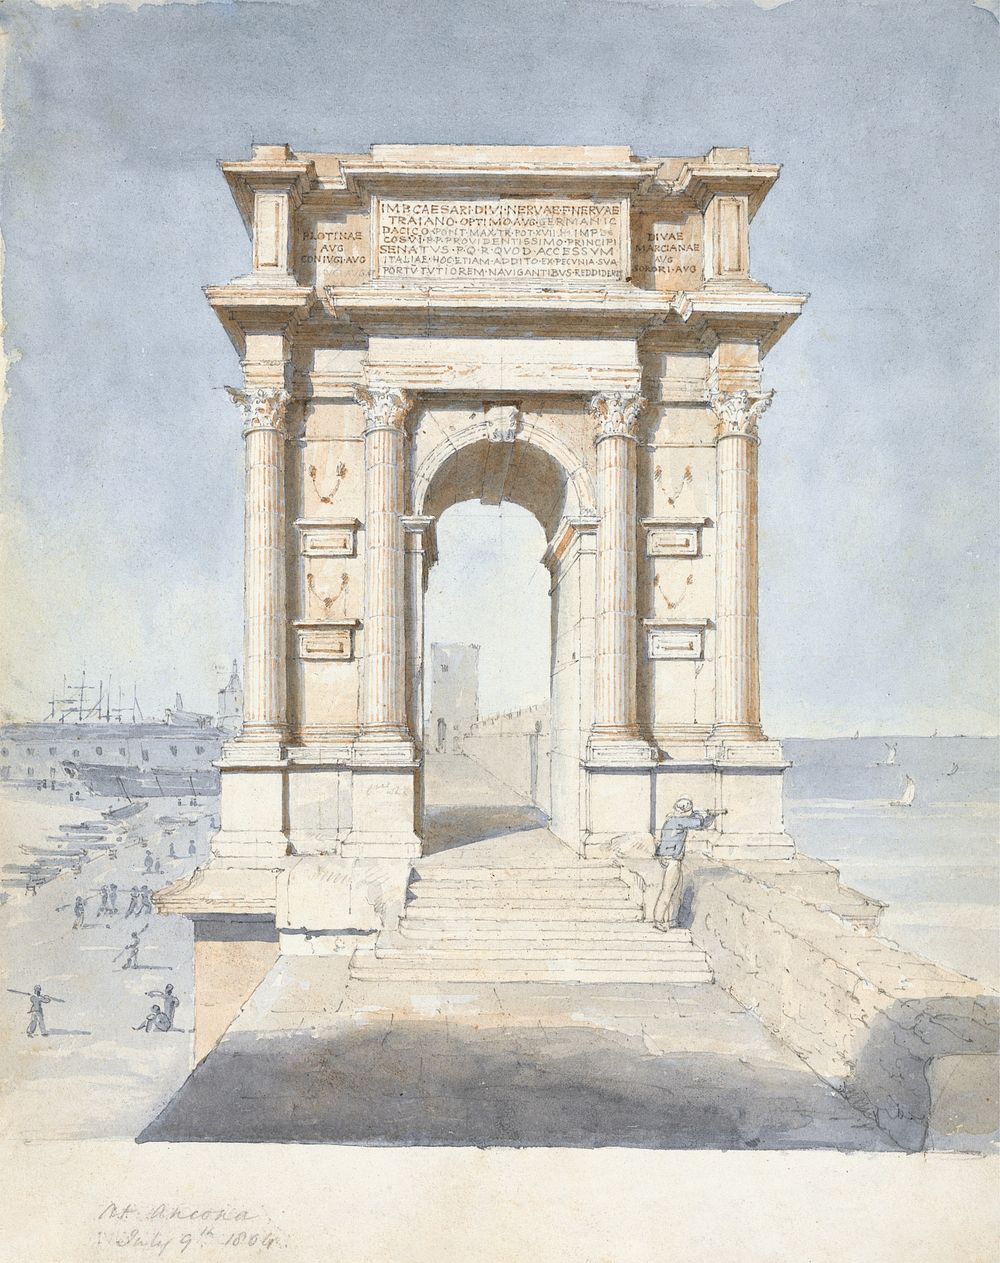 Arch of Trajan, Ancona, Italy (1804) watercolor by Sir Robert Smirke the younger. Original public domain image from Yale…